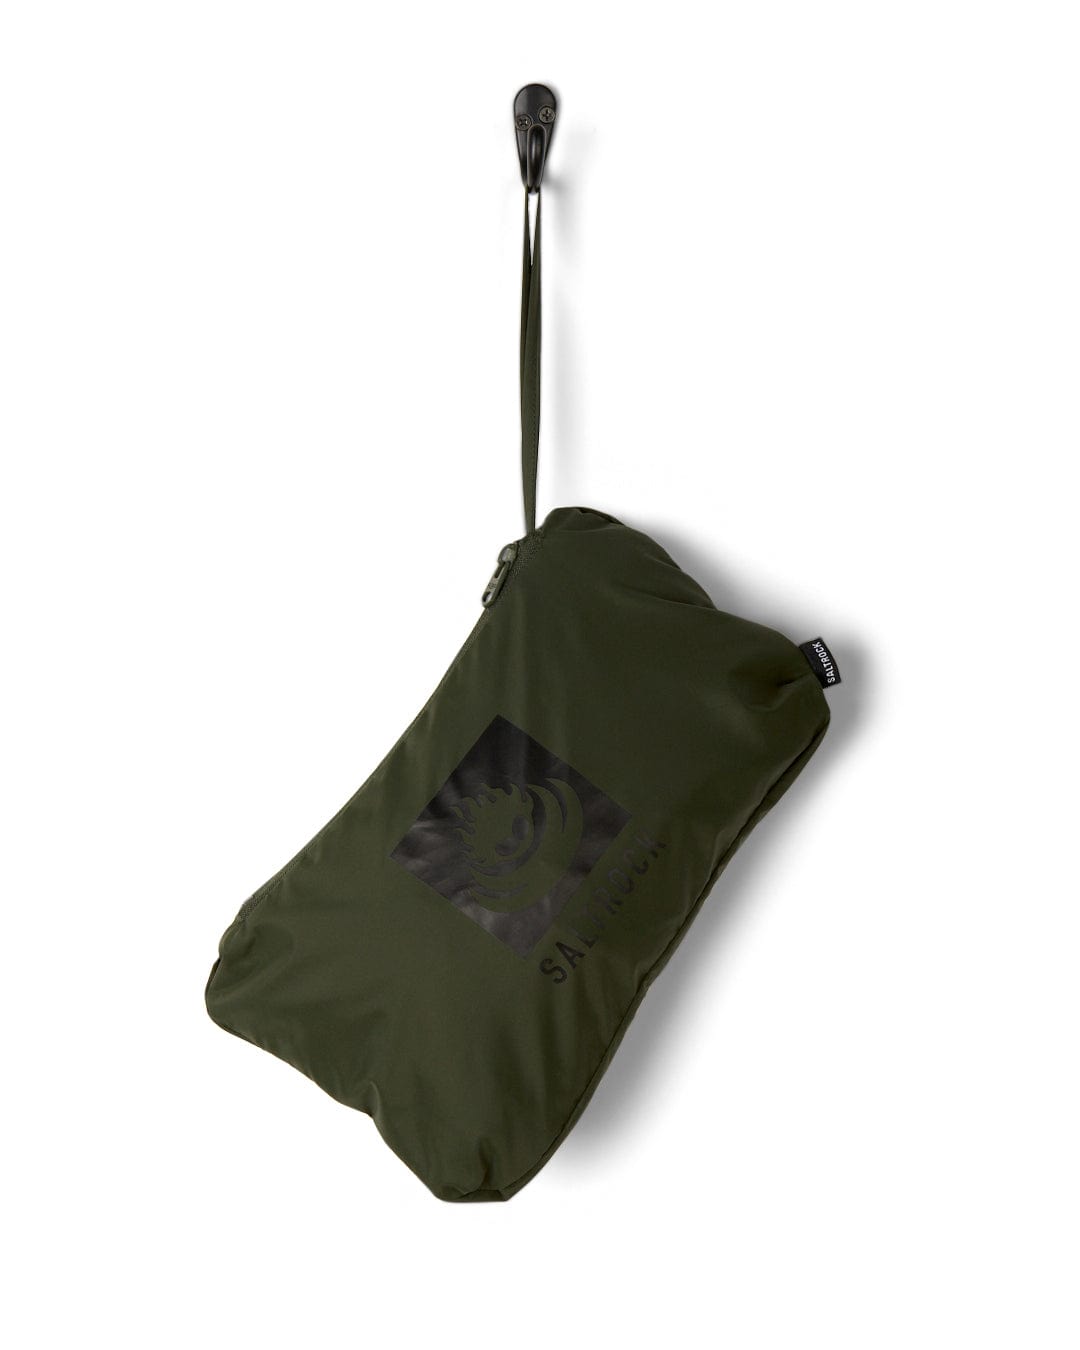 Green Rainier - Mens Packable Waterproof Jacket with a black strap and hook, featuring a Saltrock logo on the front, suspended against a white background.